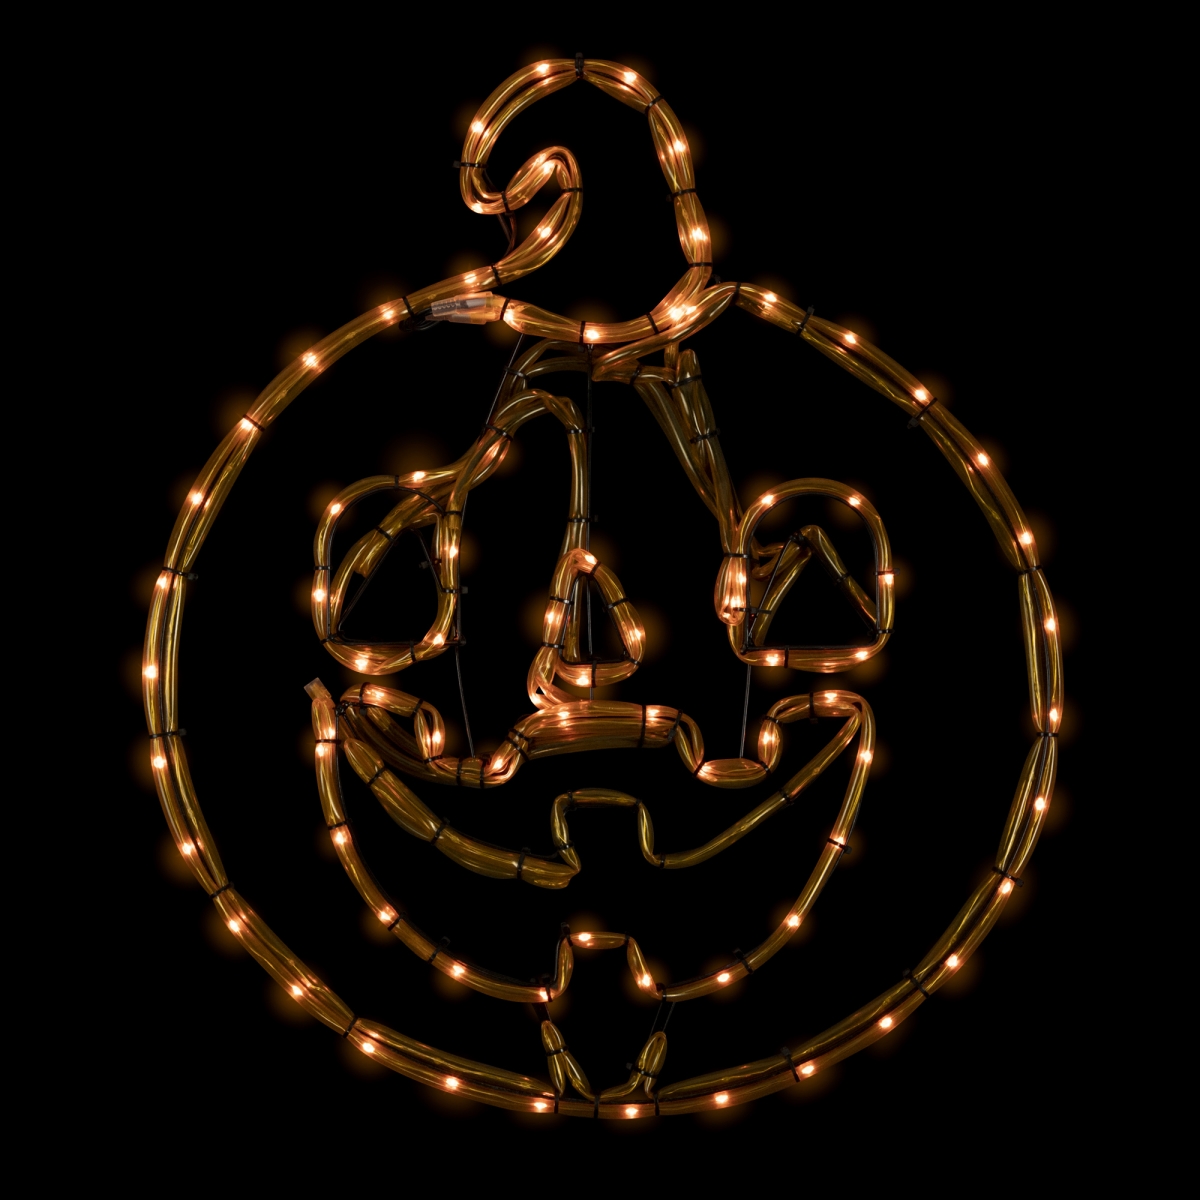 Northlight 35256337 18 in. Lighted Pumpkin with 4 Function Controller Window Silhouette Halloween Decoration